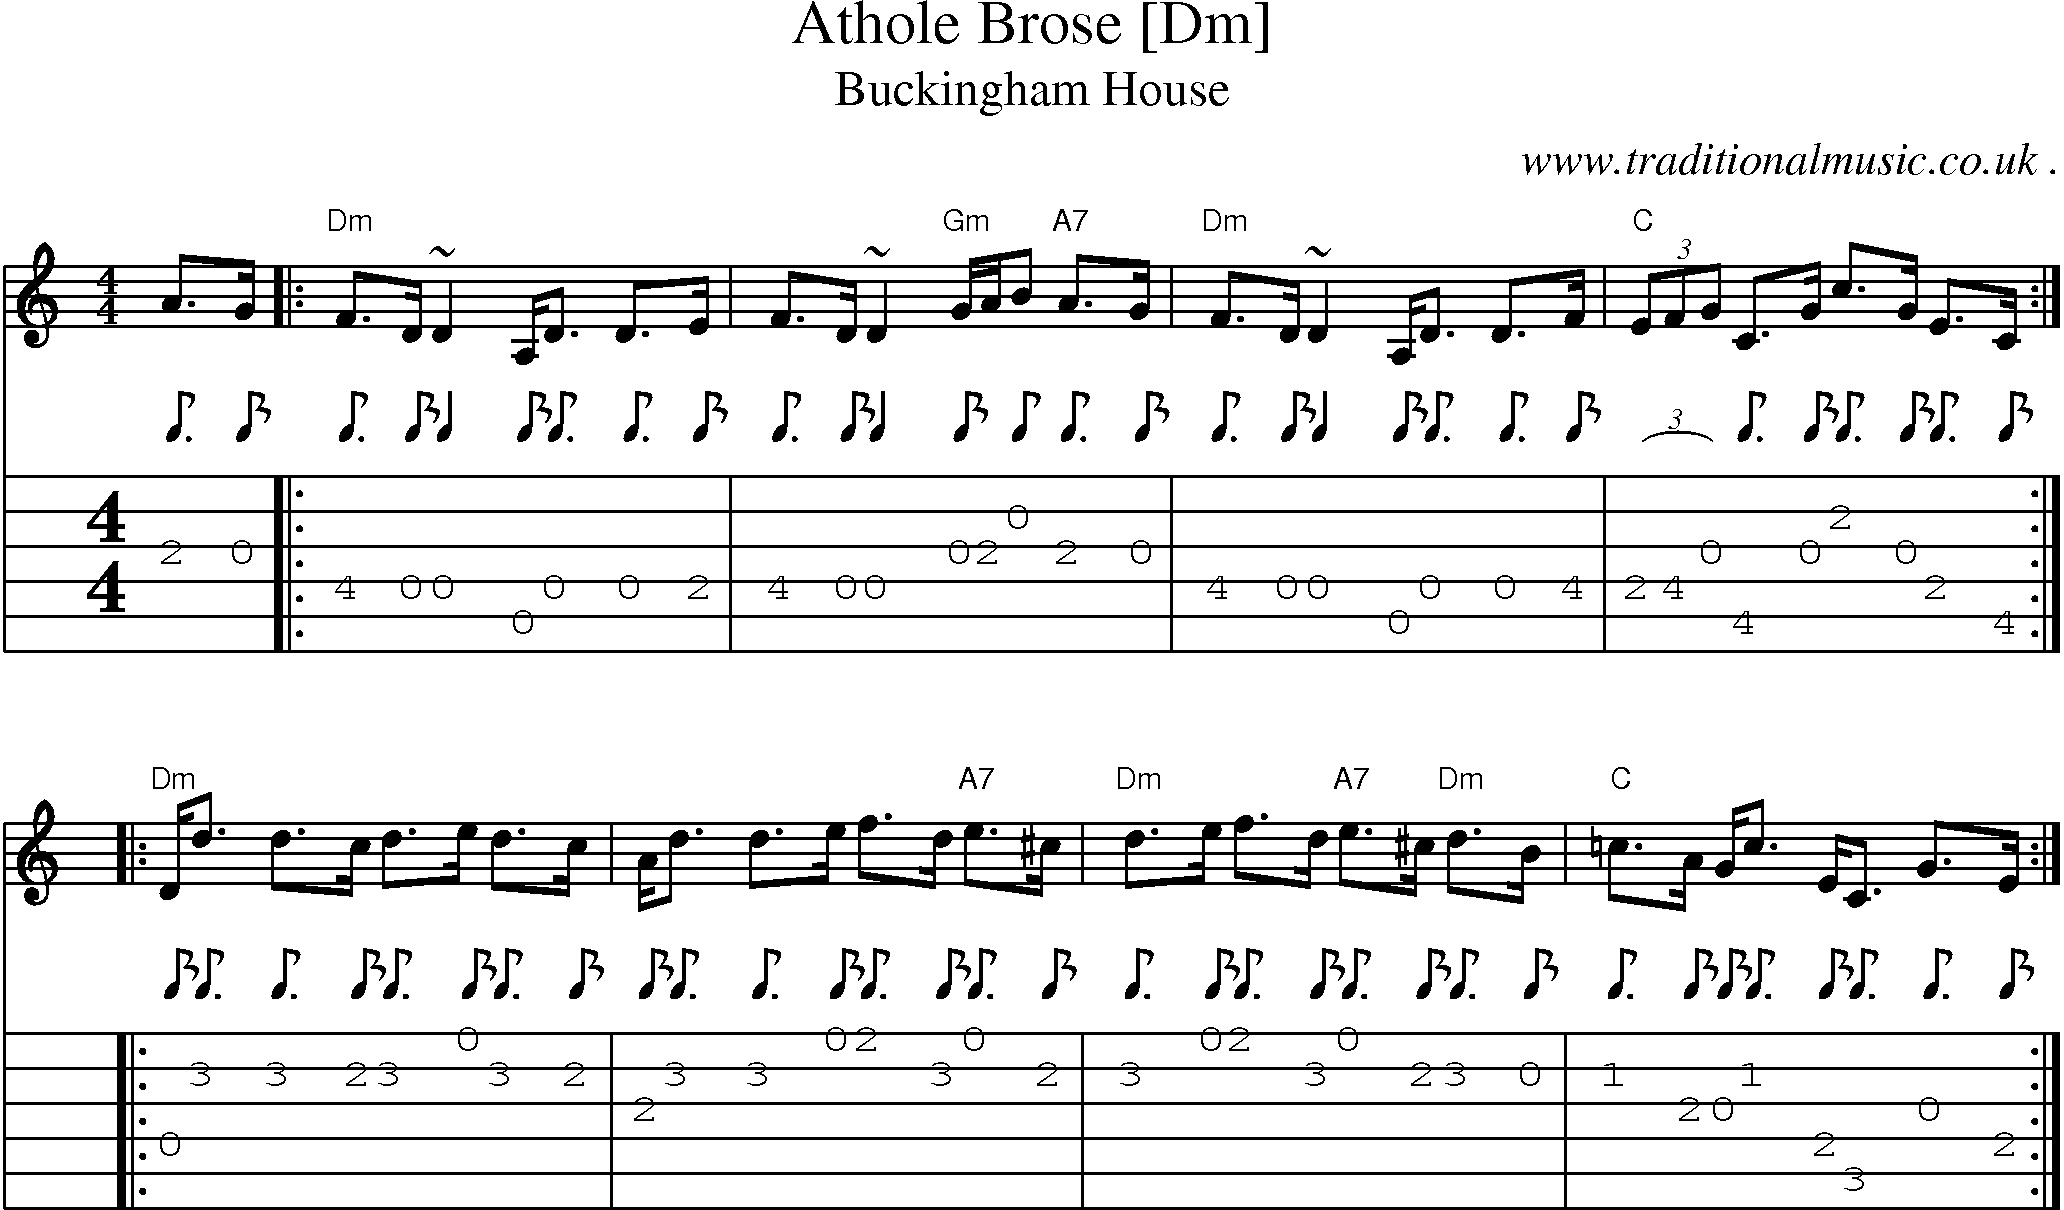 Sheet-music  score, Chords and Guitar Tabs for Athole Brose [dm]